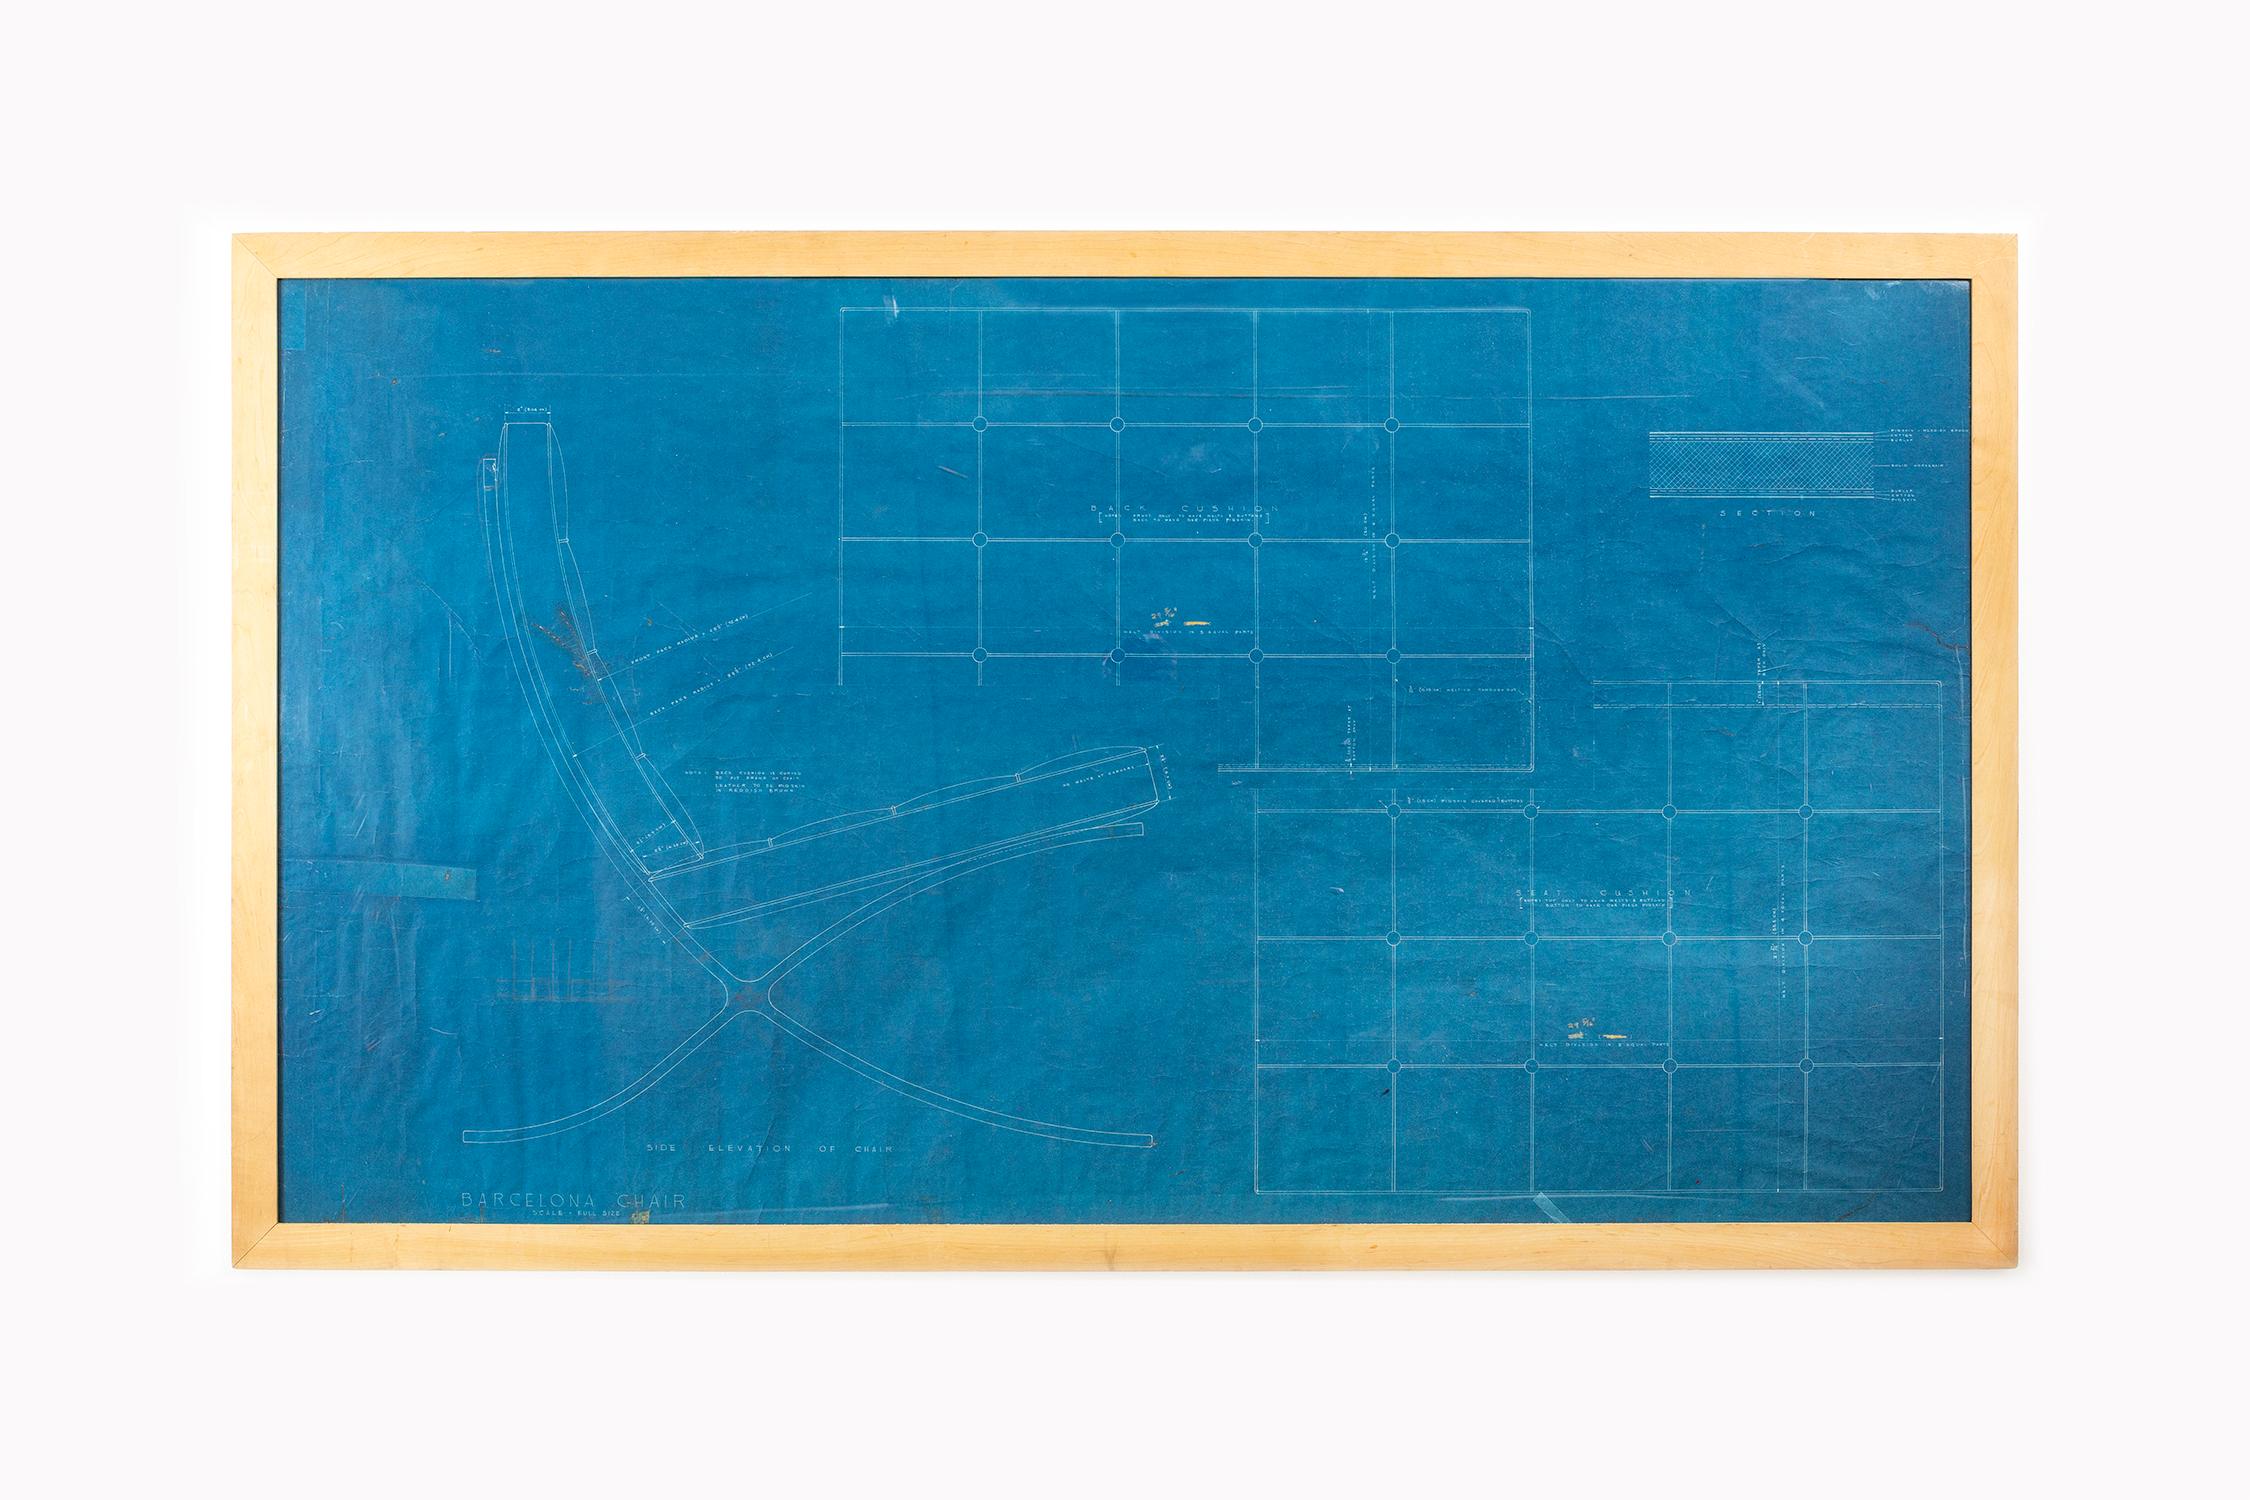 Mid-20th Century Mies van der Rohe Blueprint, 4000 N. Charles Baltimore, Md, Roof and Penthouse For Sale